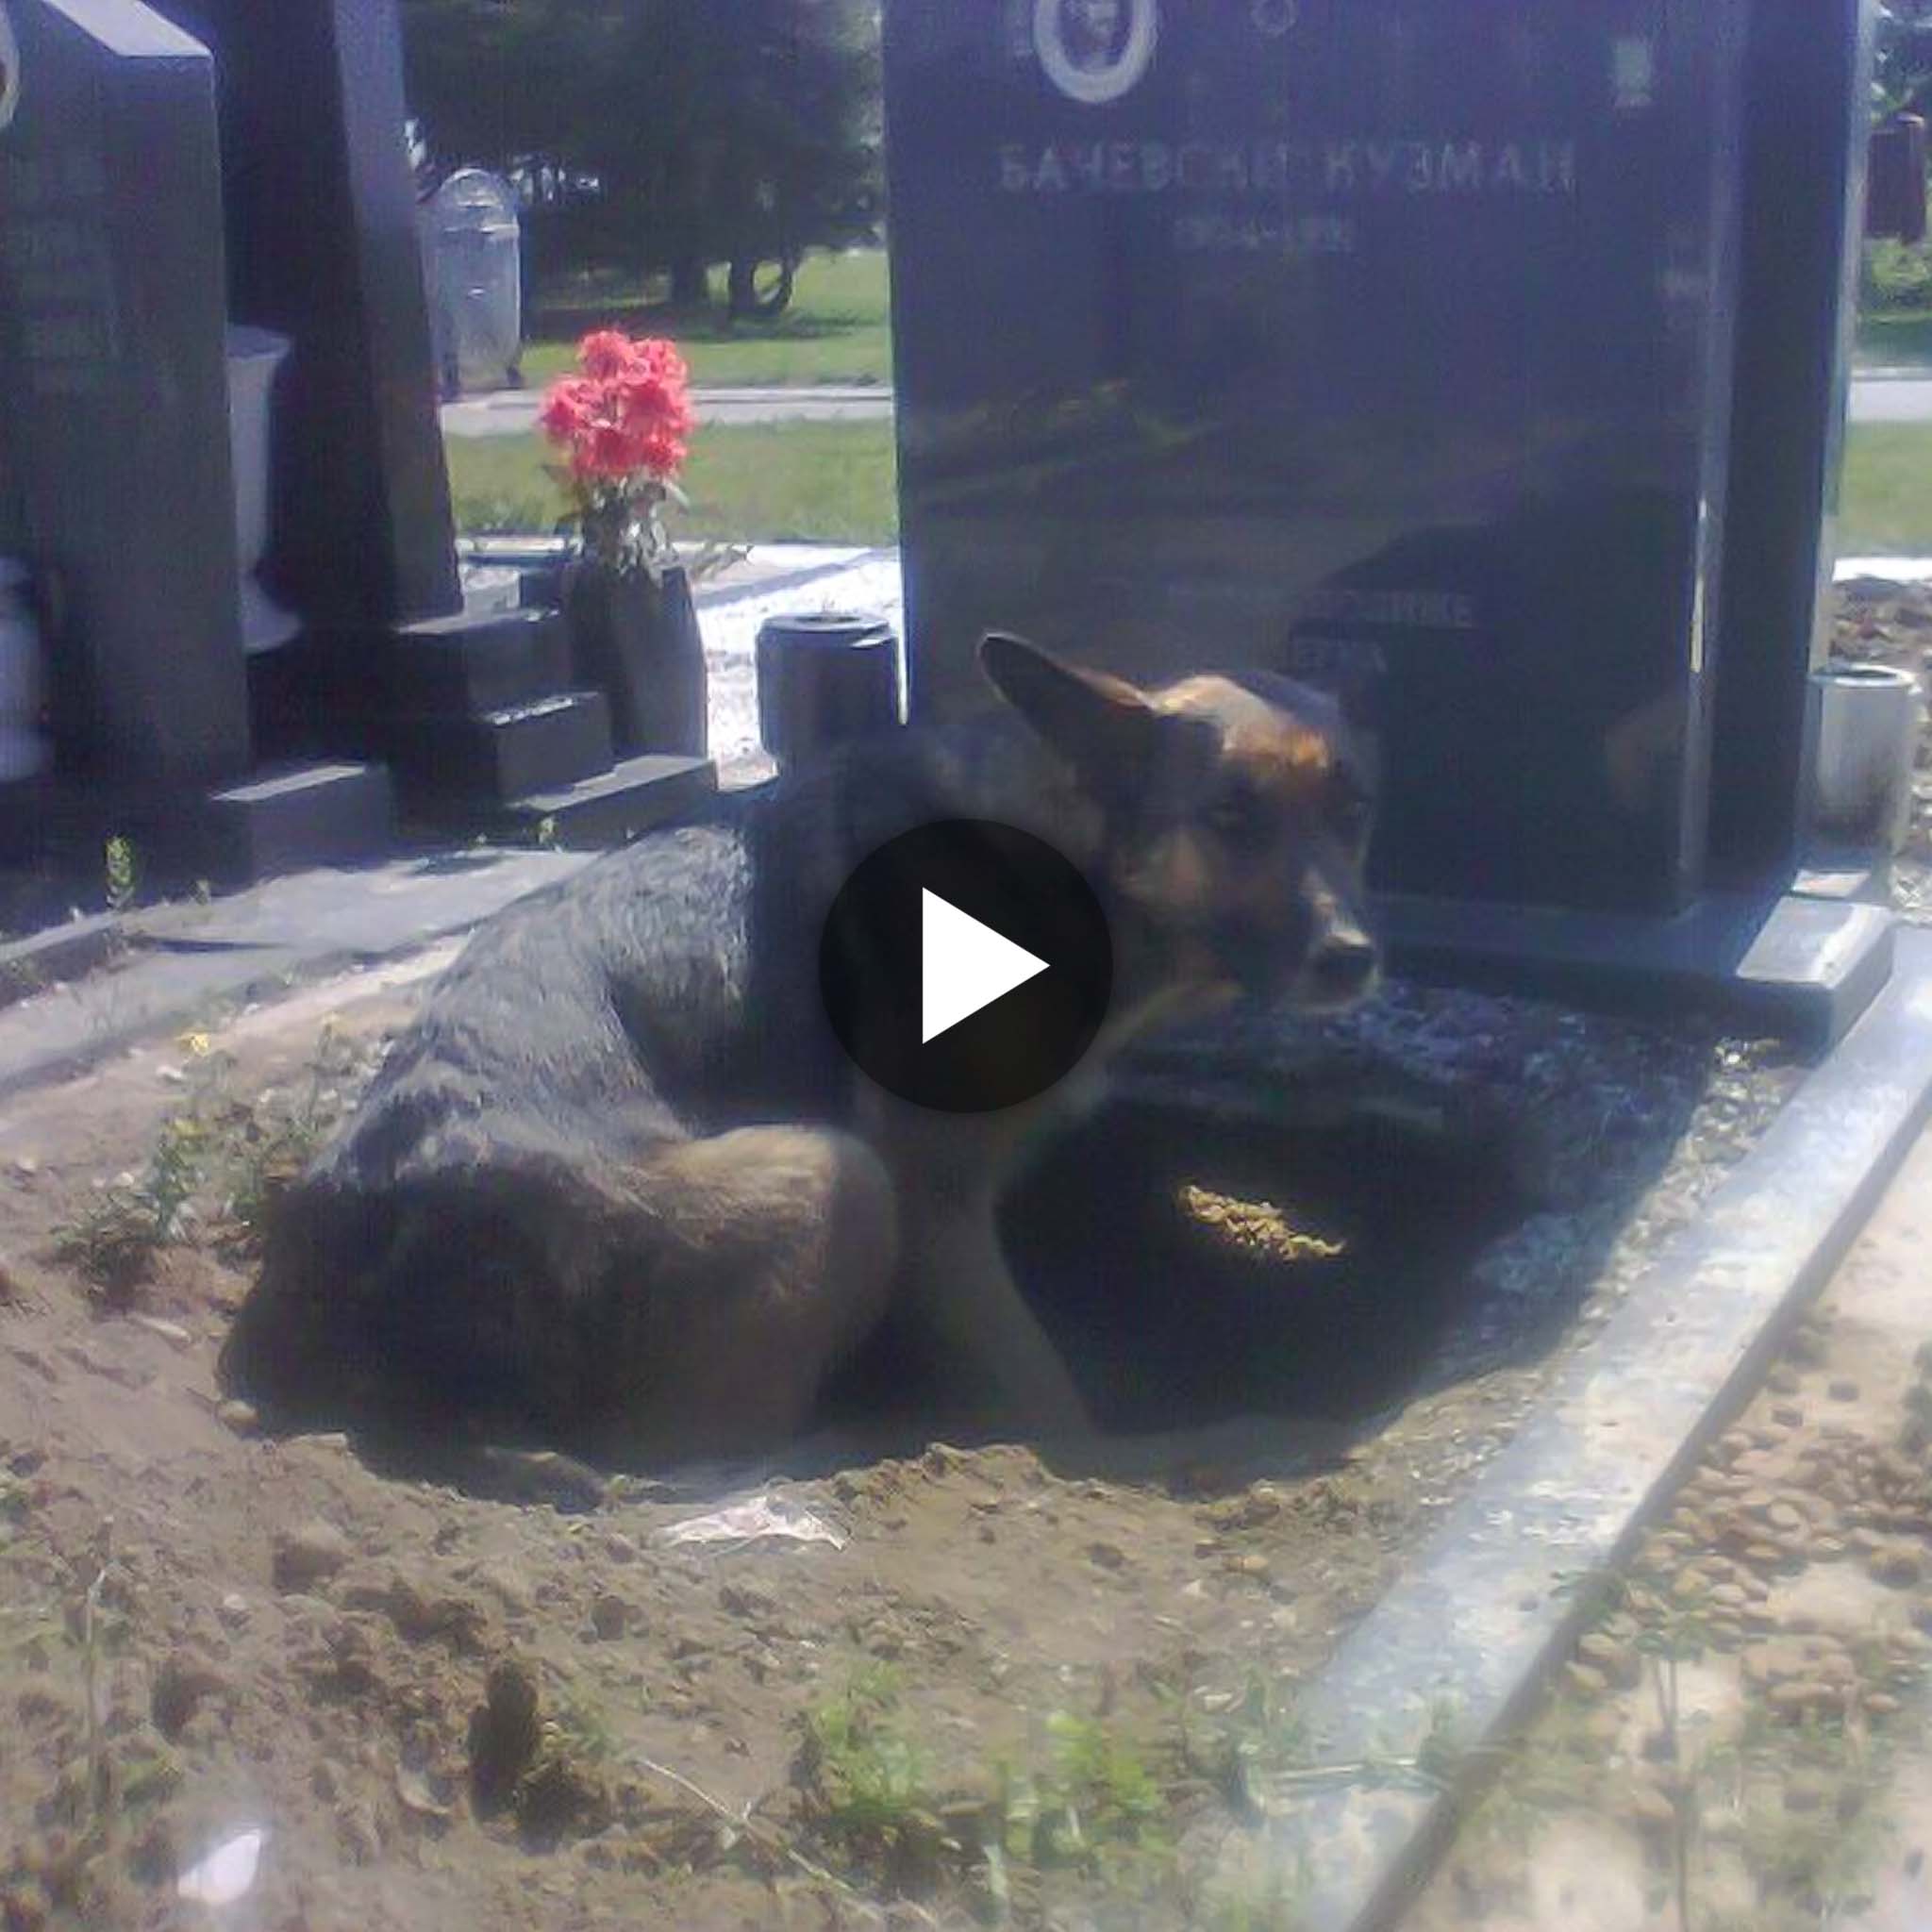 Everyone Believed That She Didn’t Want To Leave His Owner’s Tomb, But Once They Got Closer…